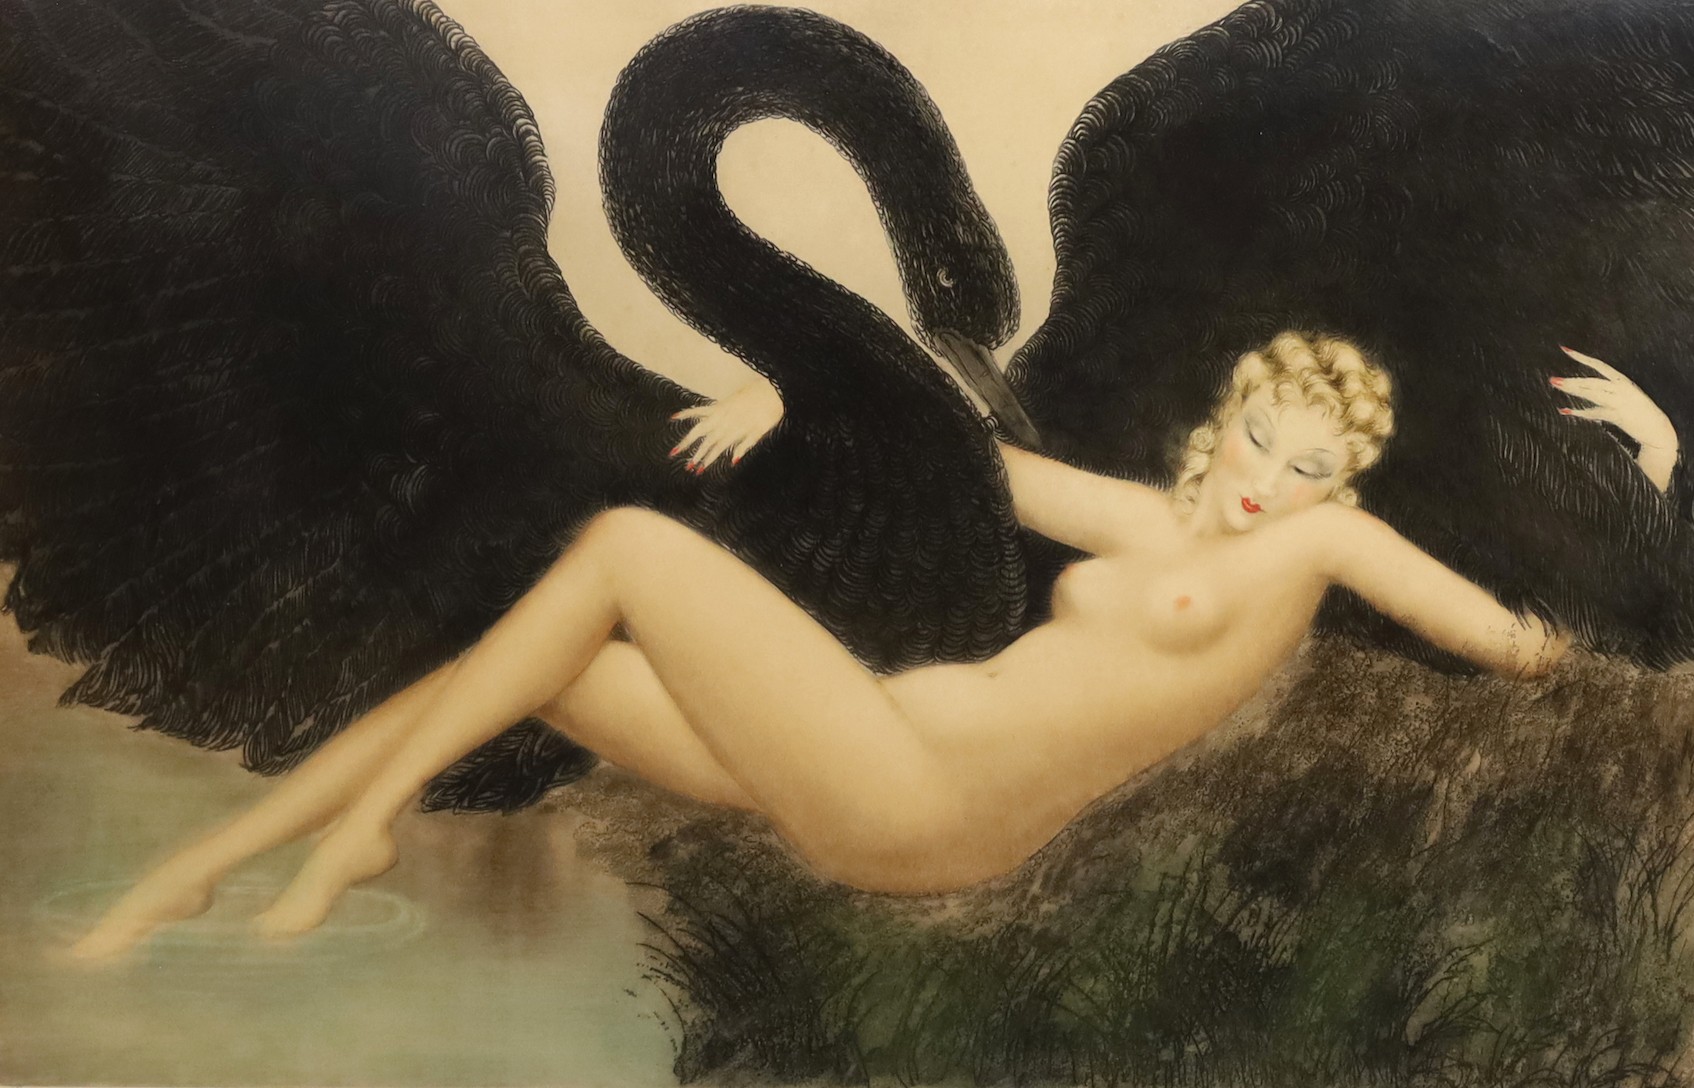 Louis Icart (1888-1950), 'Leda and the swan', drypoint etching with hand colouring,1934, 55 x 81cm